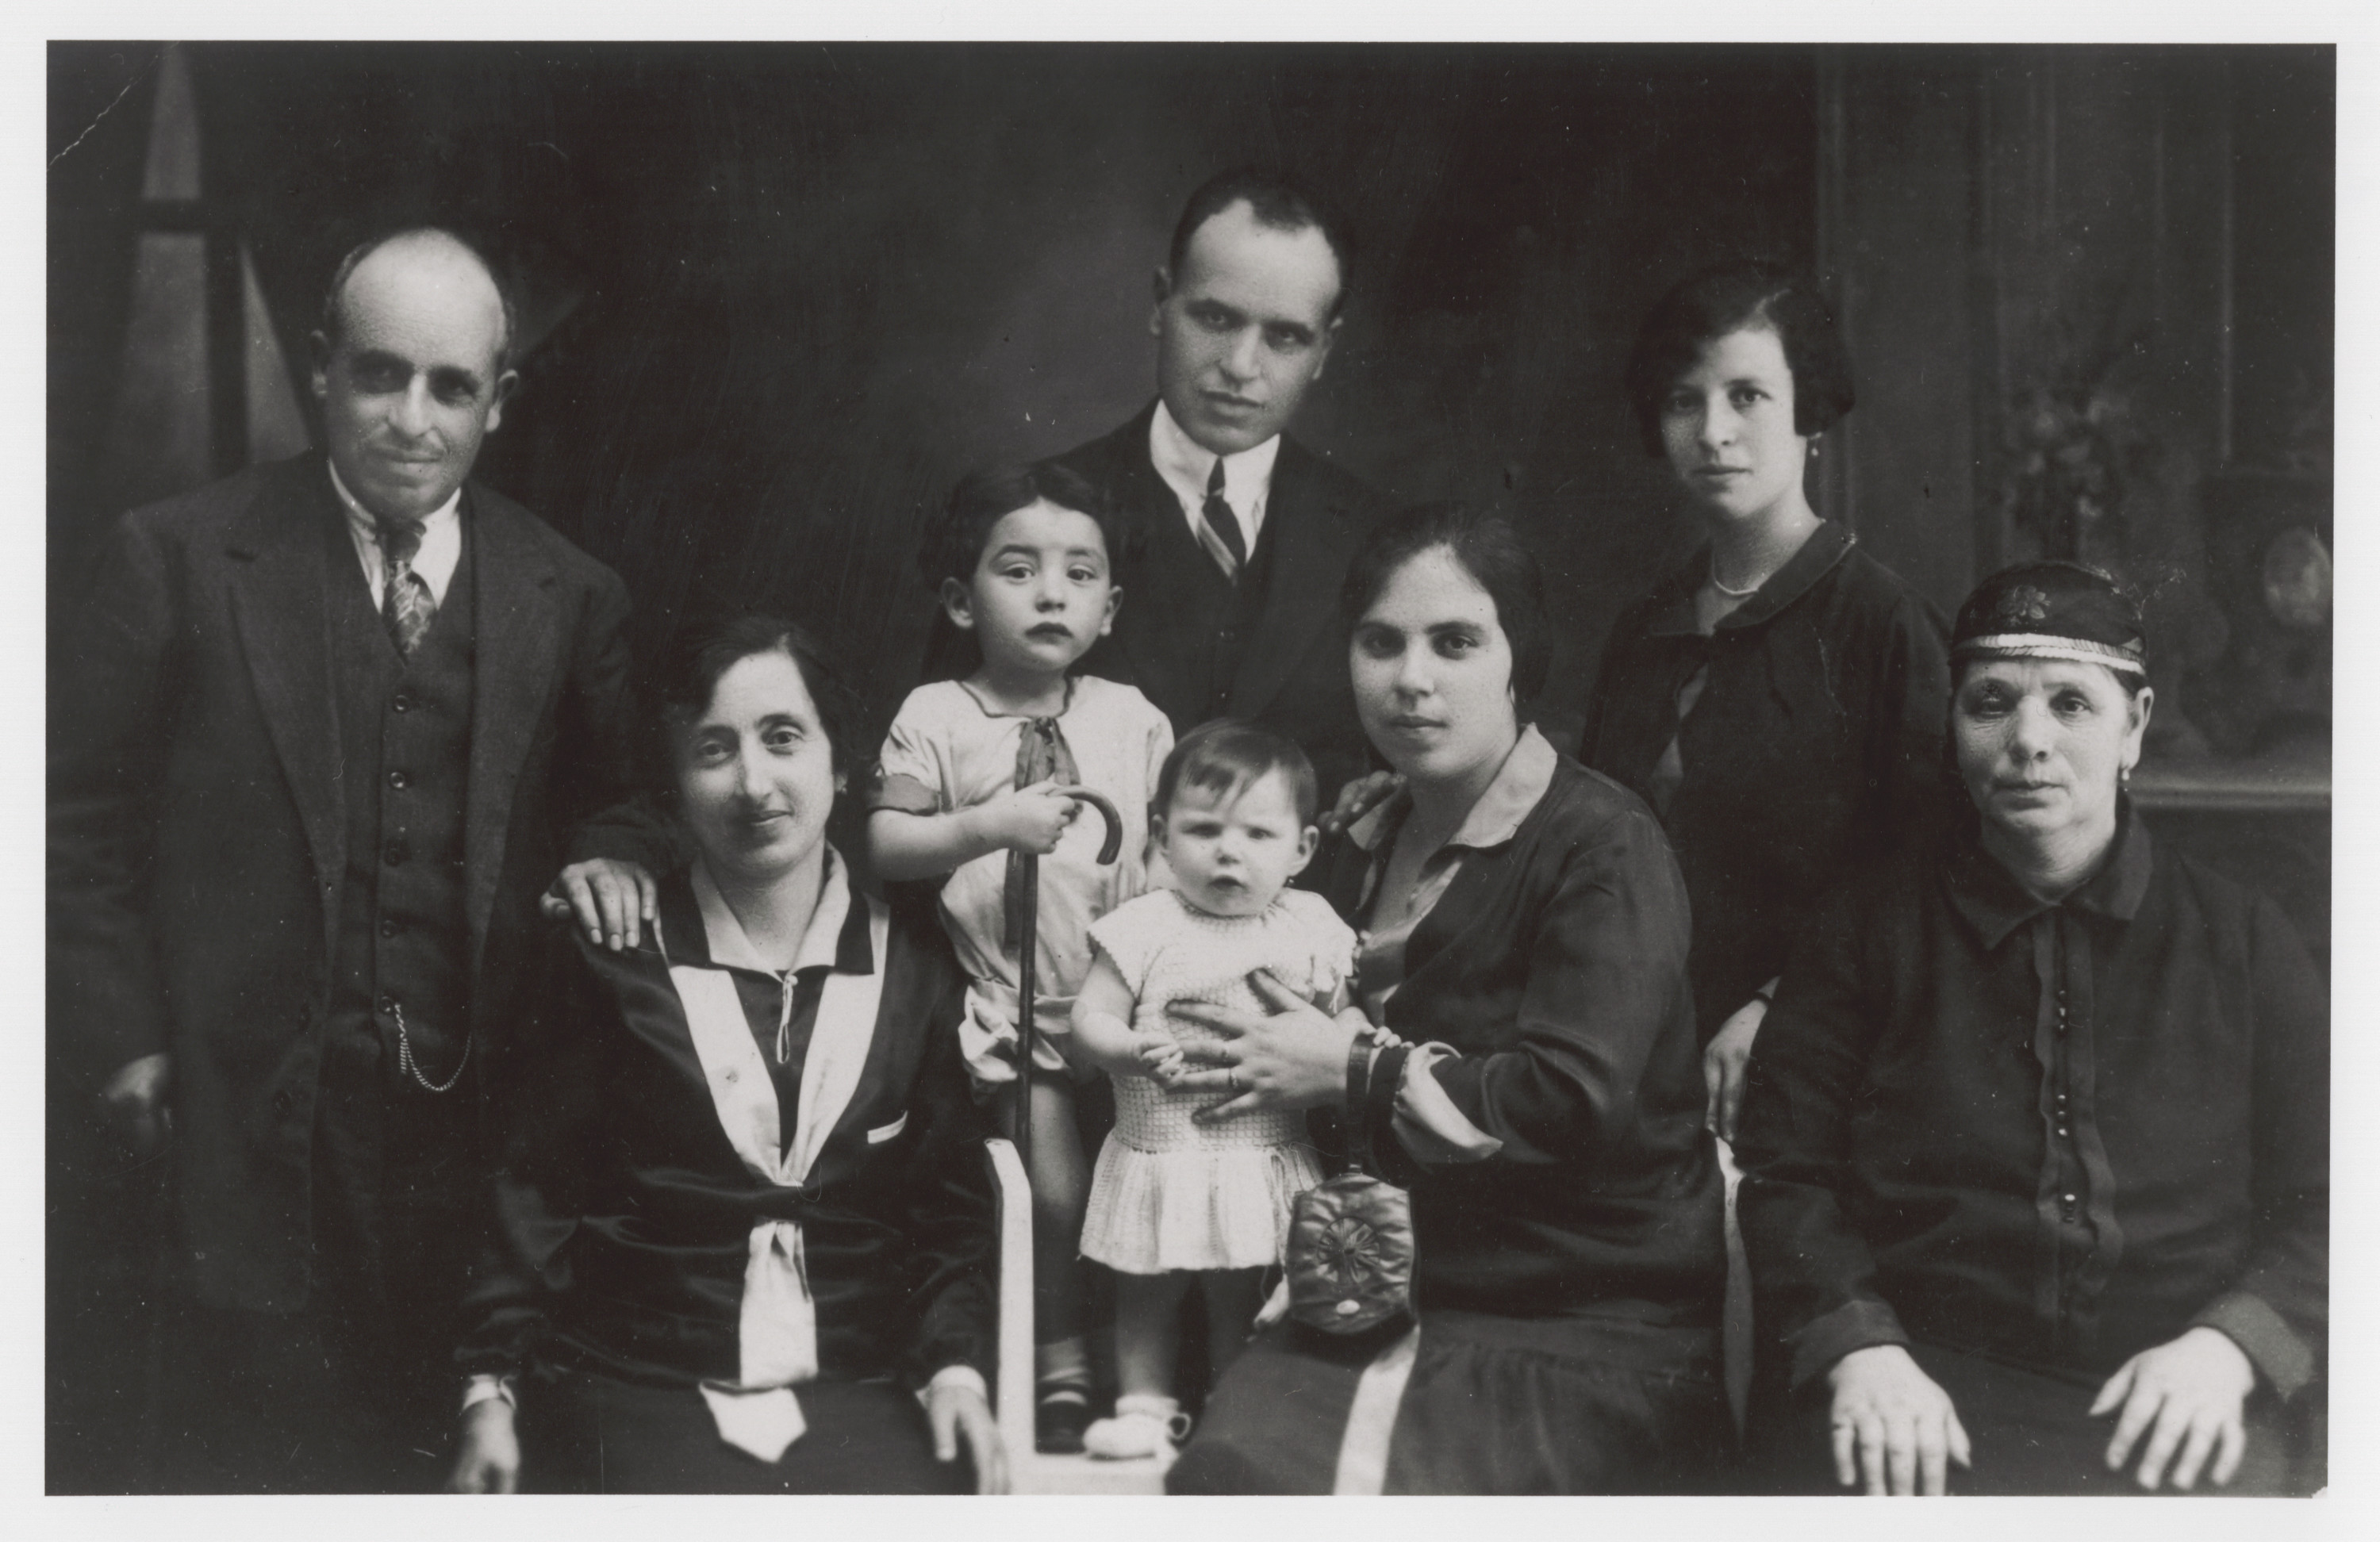 Portrait of a Jewish family in Monastir (Bitola).

Among those pictured are (standing in back, left to right) Mr. Shami and Mr. Shami (brothers), and [an unidentified woman]; (seated, left to right) the sister of Mrs. Mayo (who was a cousin of Avram Nahmias), [an unidentifed child], Allegra ("Gita"), Sara Shami (sister of Rachel Nahmias' brother-in-law, Samuel Levy), and "Grandma" Shami.